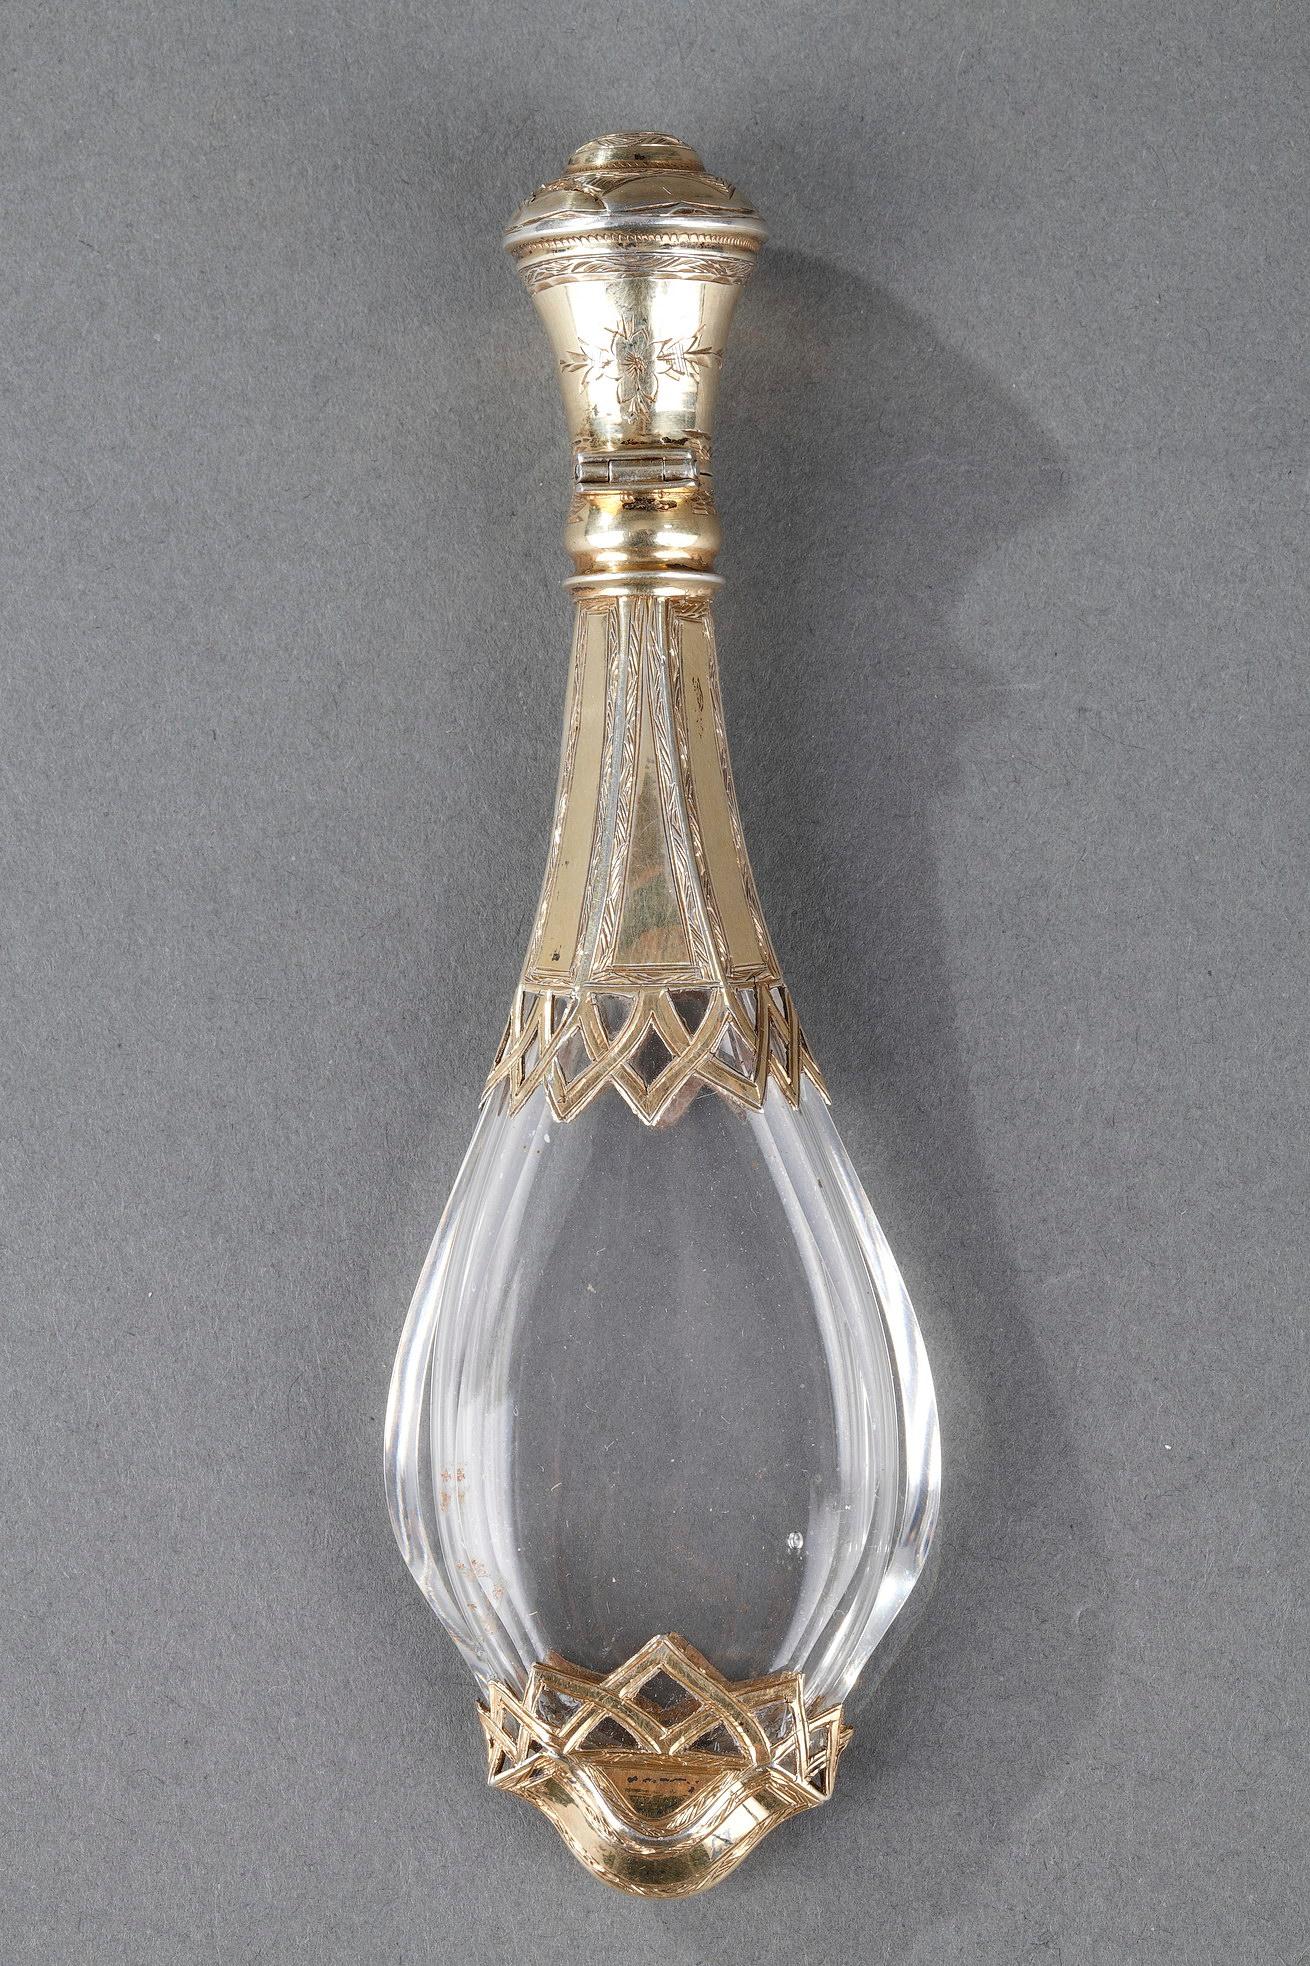 A silver mounted glass scent bottle with shaped baluster body, the part open work collar and foot are pierced and engraved. The circular lid has a stand-away hinge and glass stopper.

H:4.72in. (12 cm) / L: 1.49in. (3,8 cm) / l: 0.66in. (1,7